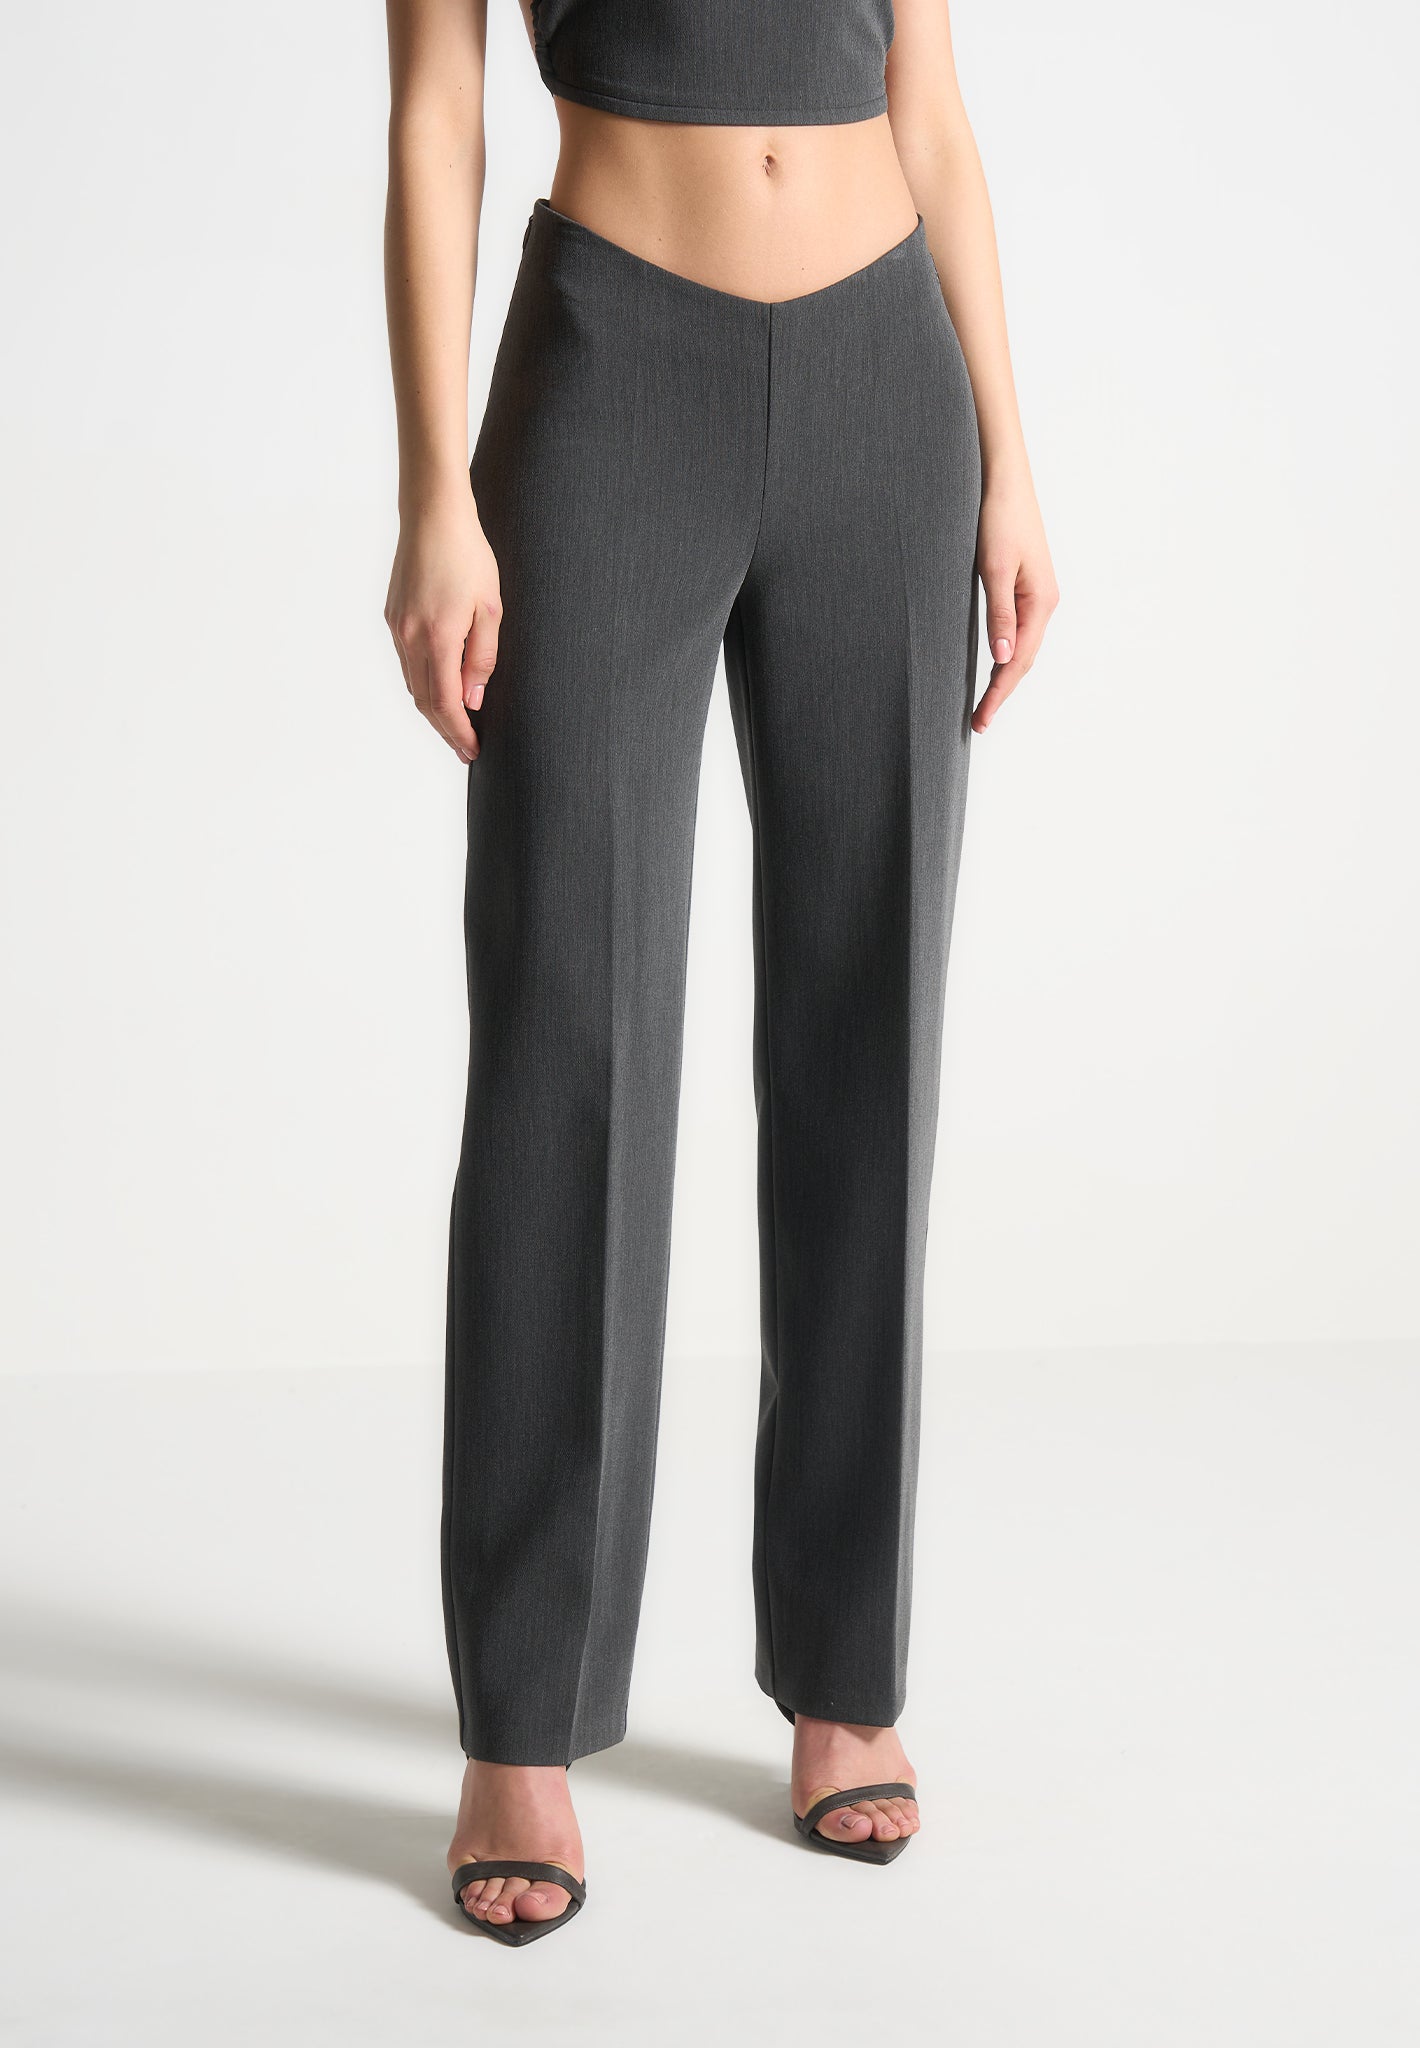 curved-waist-tailored-trousers-dark-grey